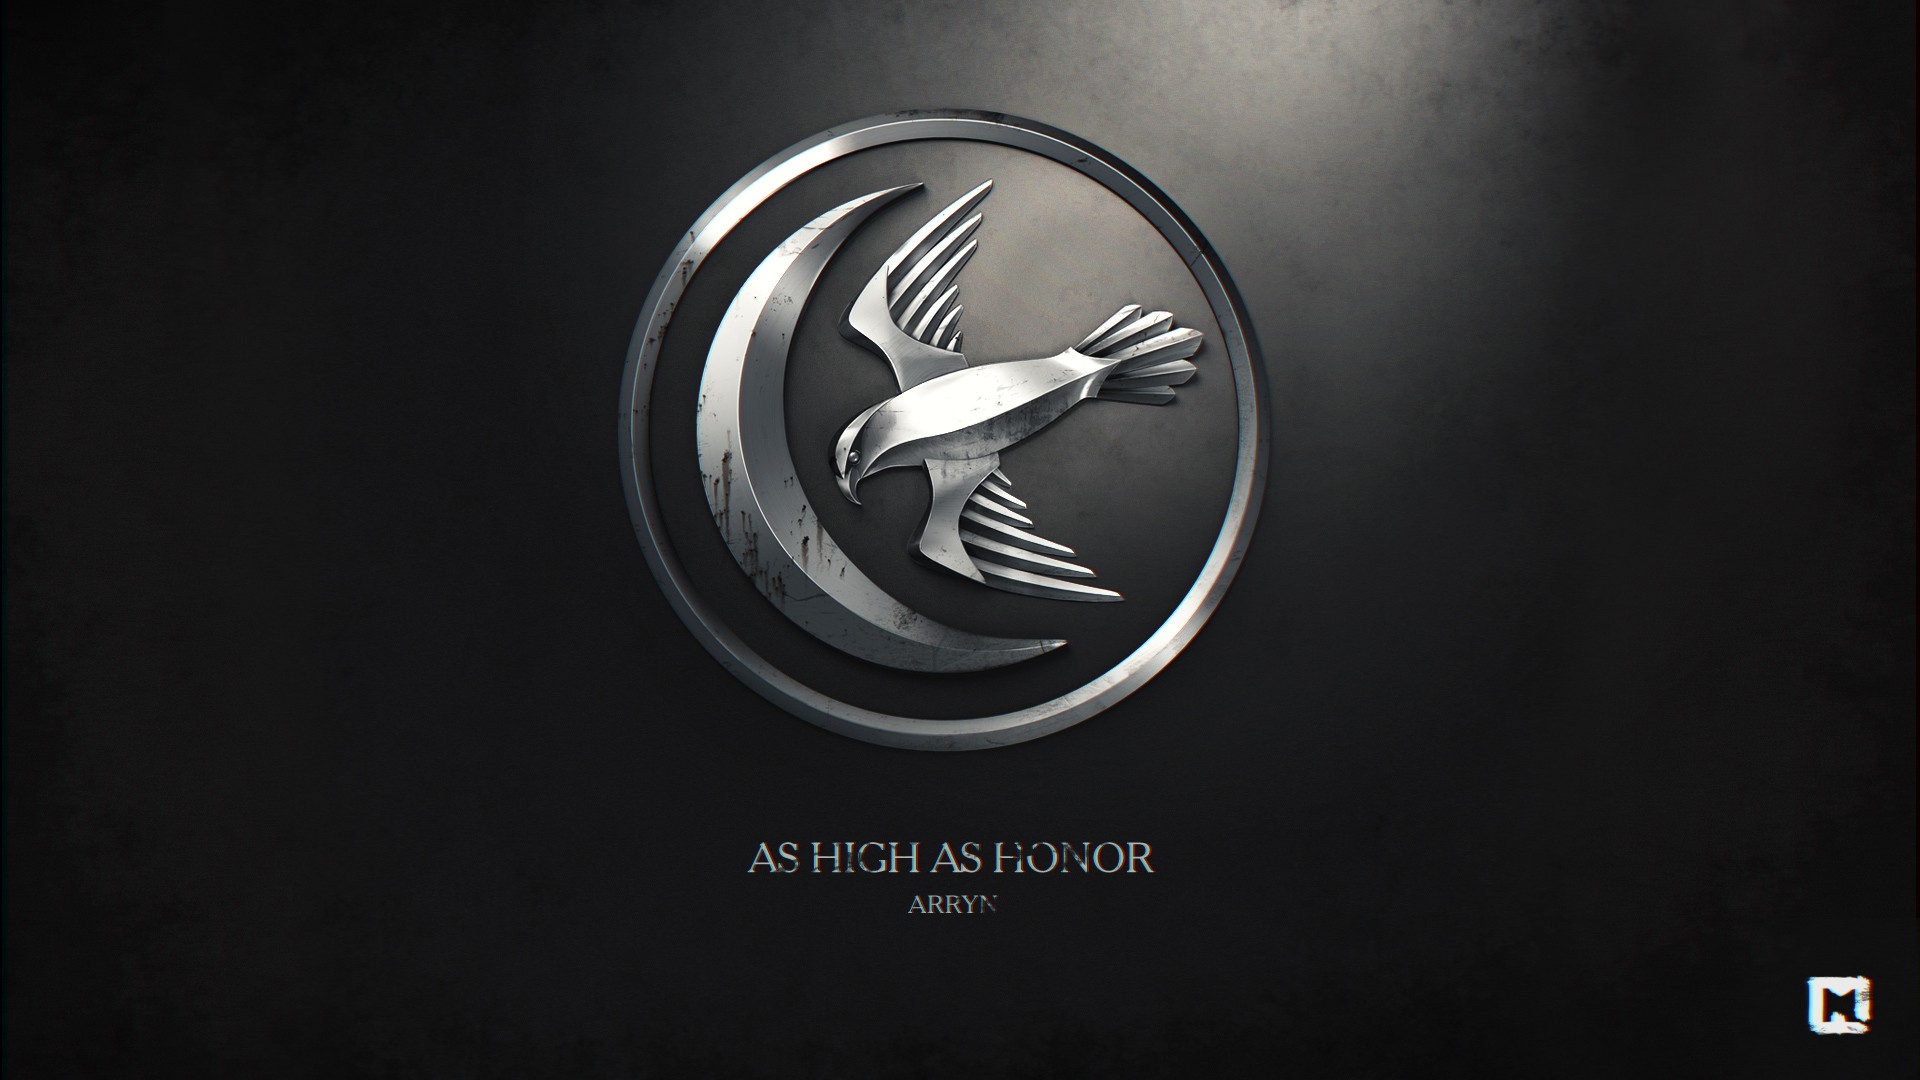 A Song Of Ice And Fire, Digital Art, Game Of Thrones, House Arryn, Sigils Wallpaper